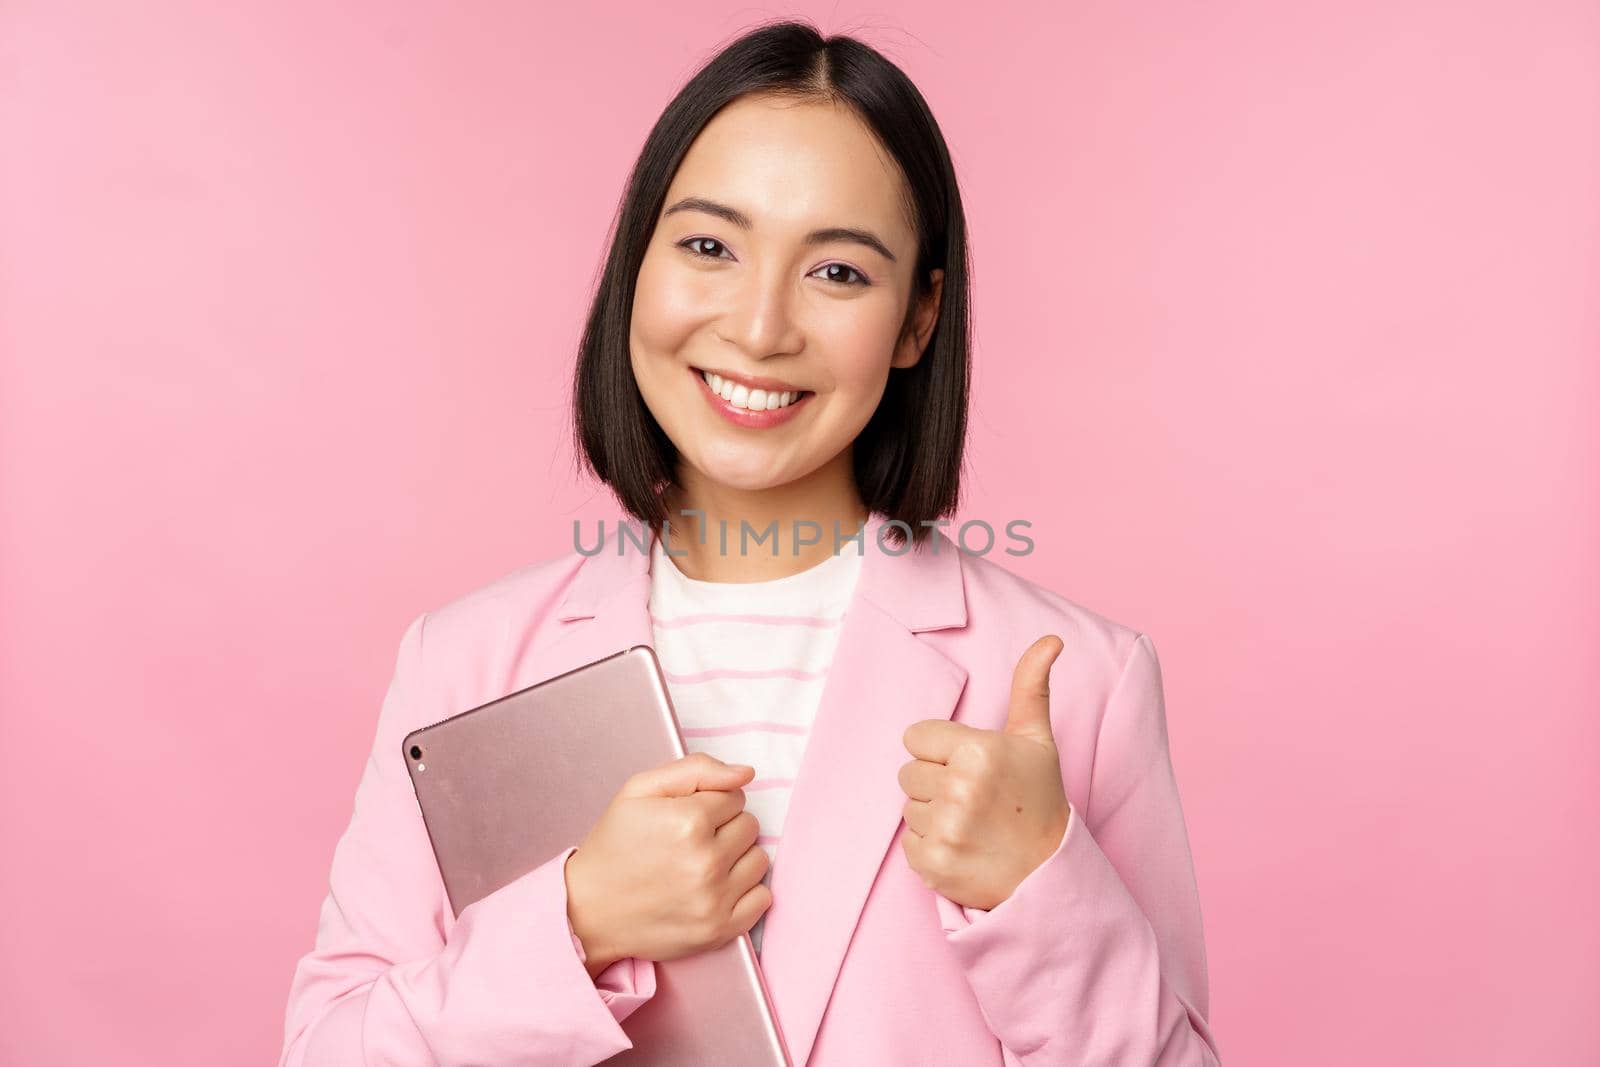 Portrait of corporate woman, girl in office in business suit, holding digital tablet, showing thumbs up, recommending company, standing over pink background.